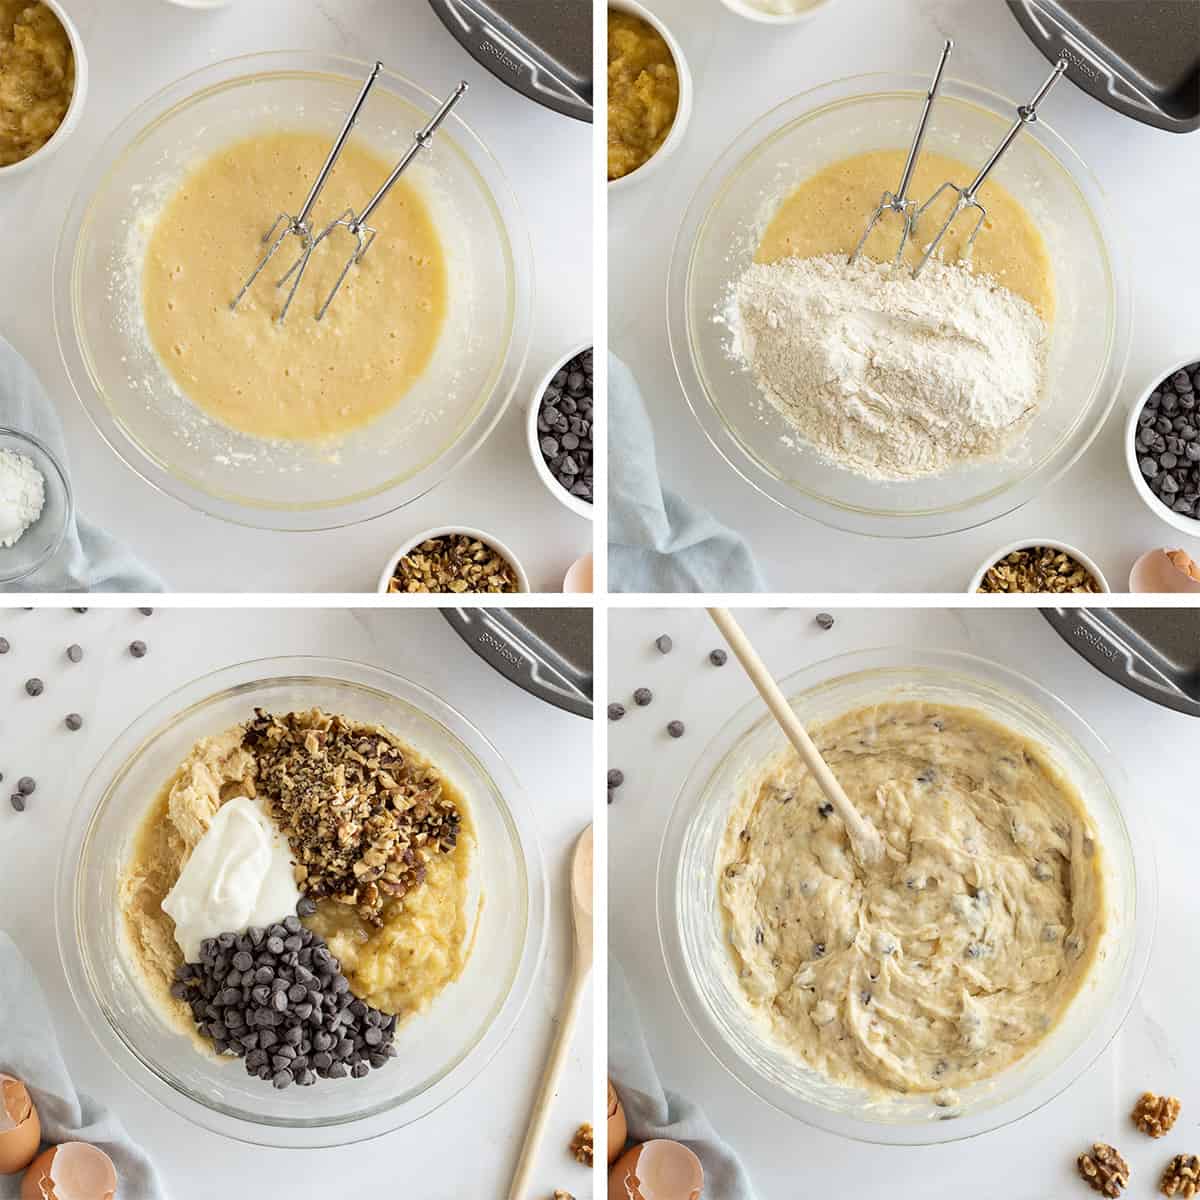 Four images of chocolate chip banana bread ingredients in a mixing bowl.